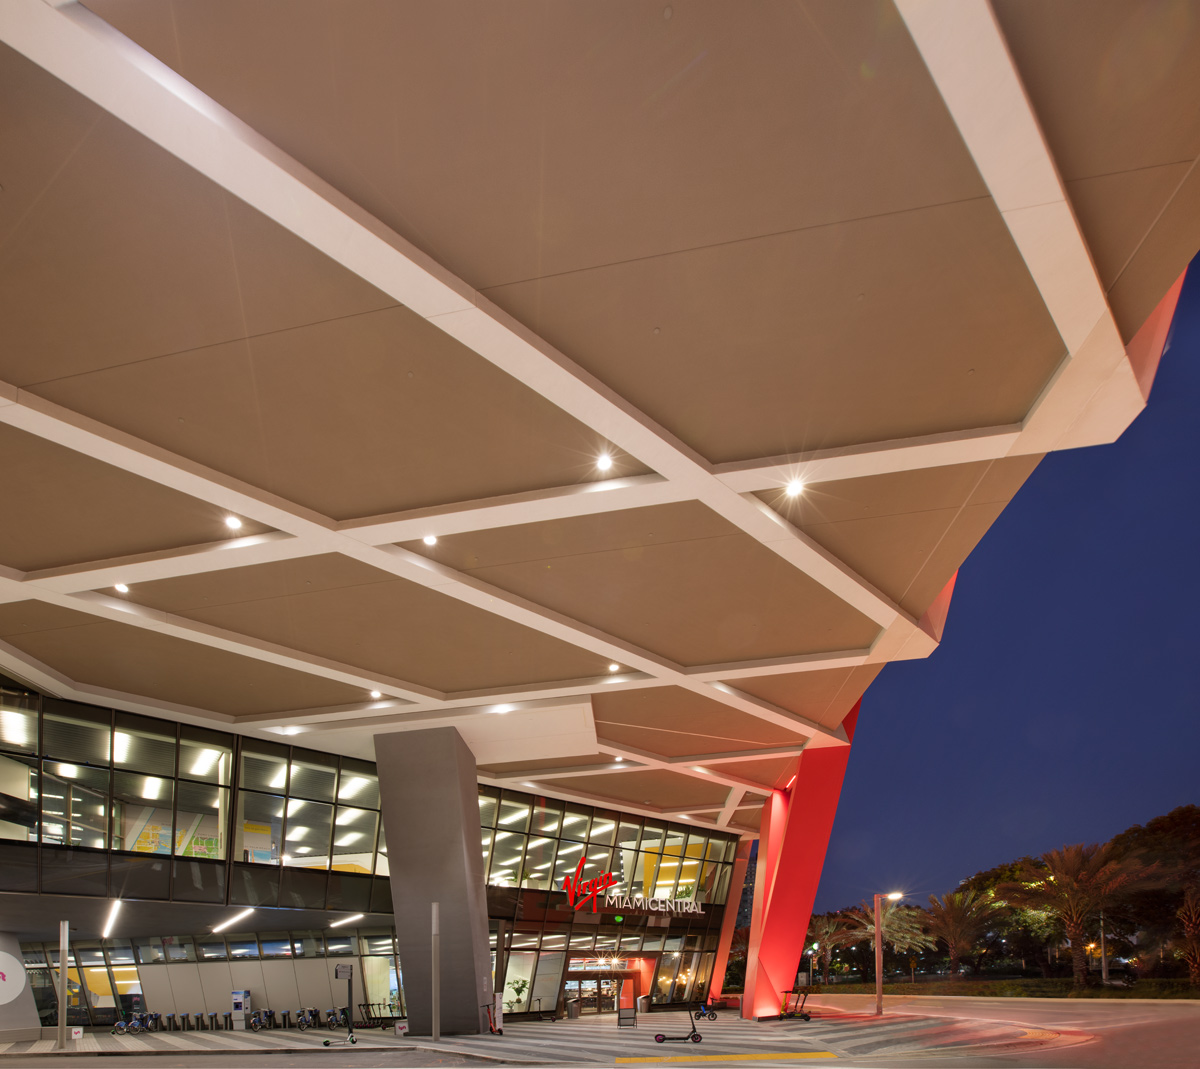 Architectural dusk view of the Brightline Miami Central terminal  entrance.